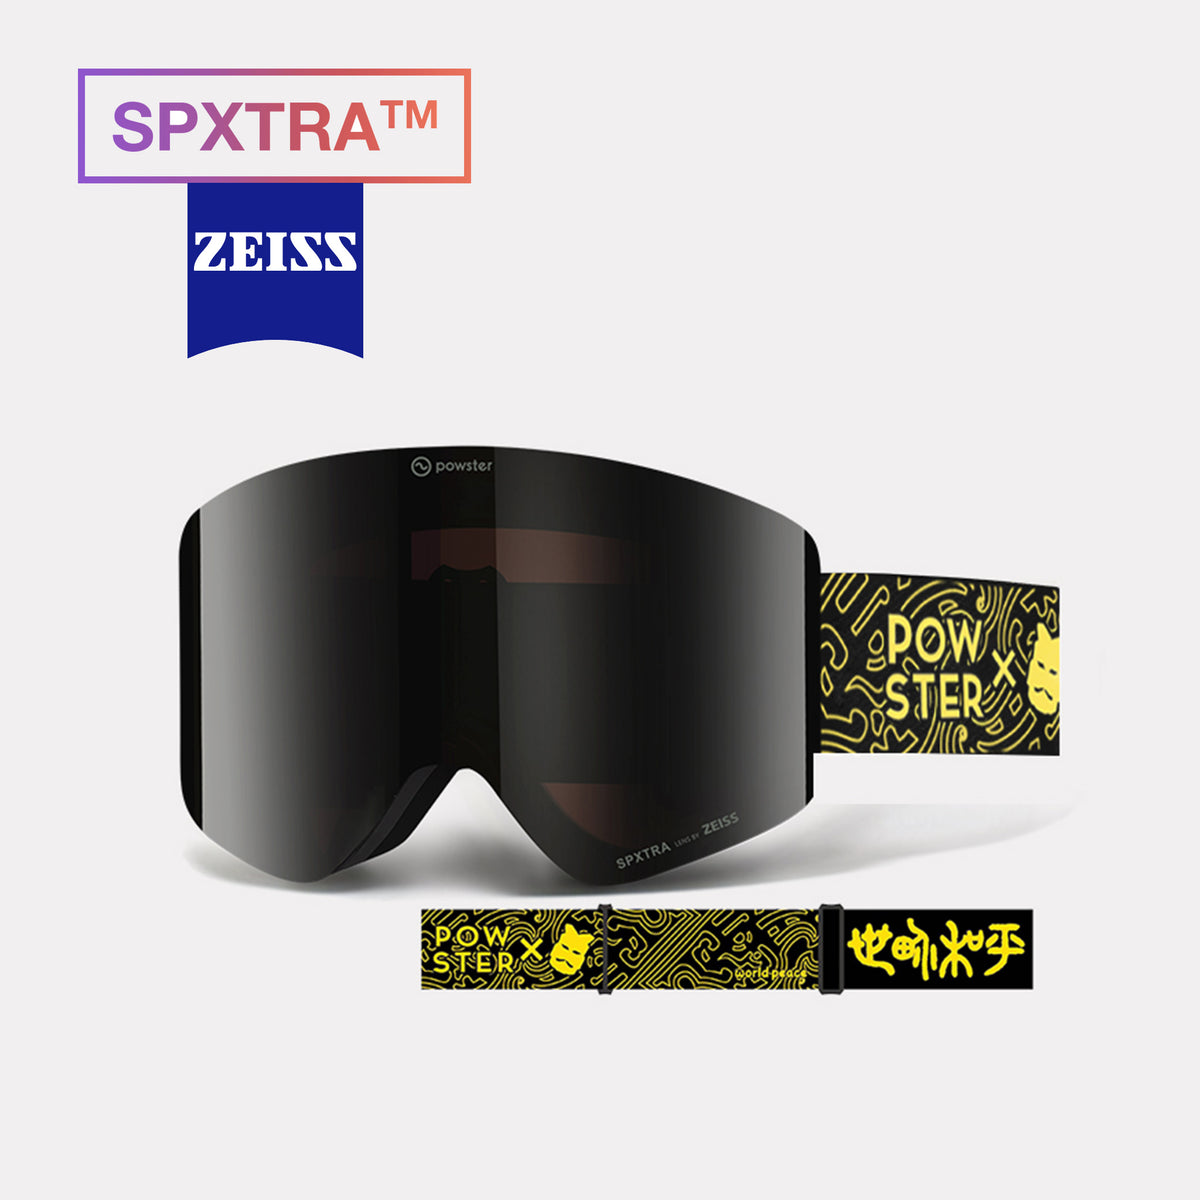 Asteroid THISARMY Special Edition ZEISS Lens Ski Goggles